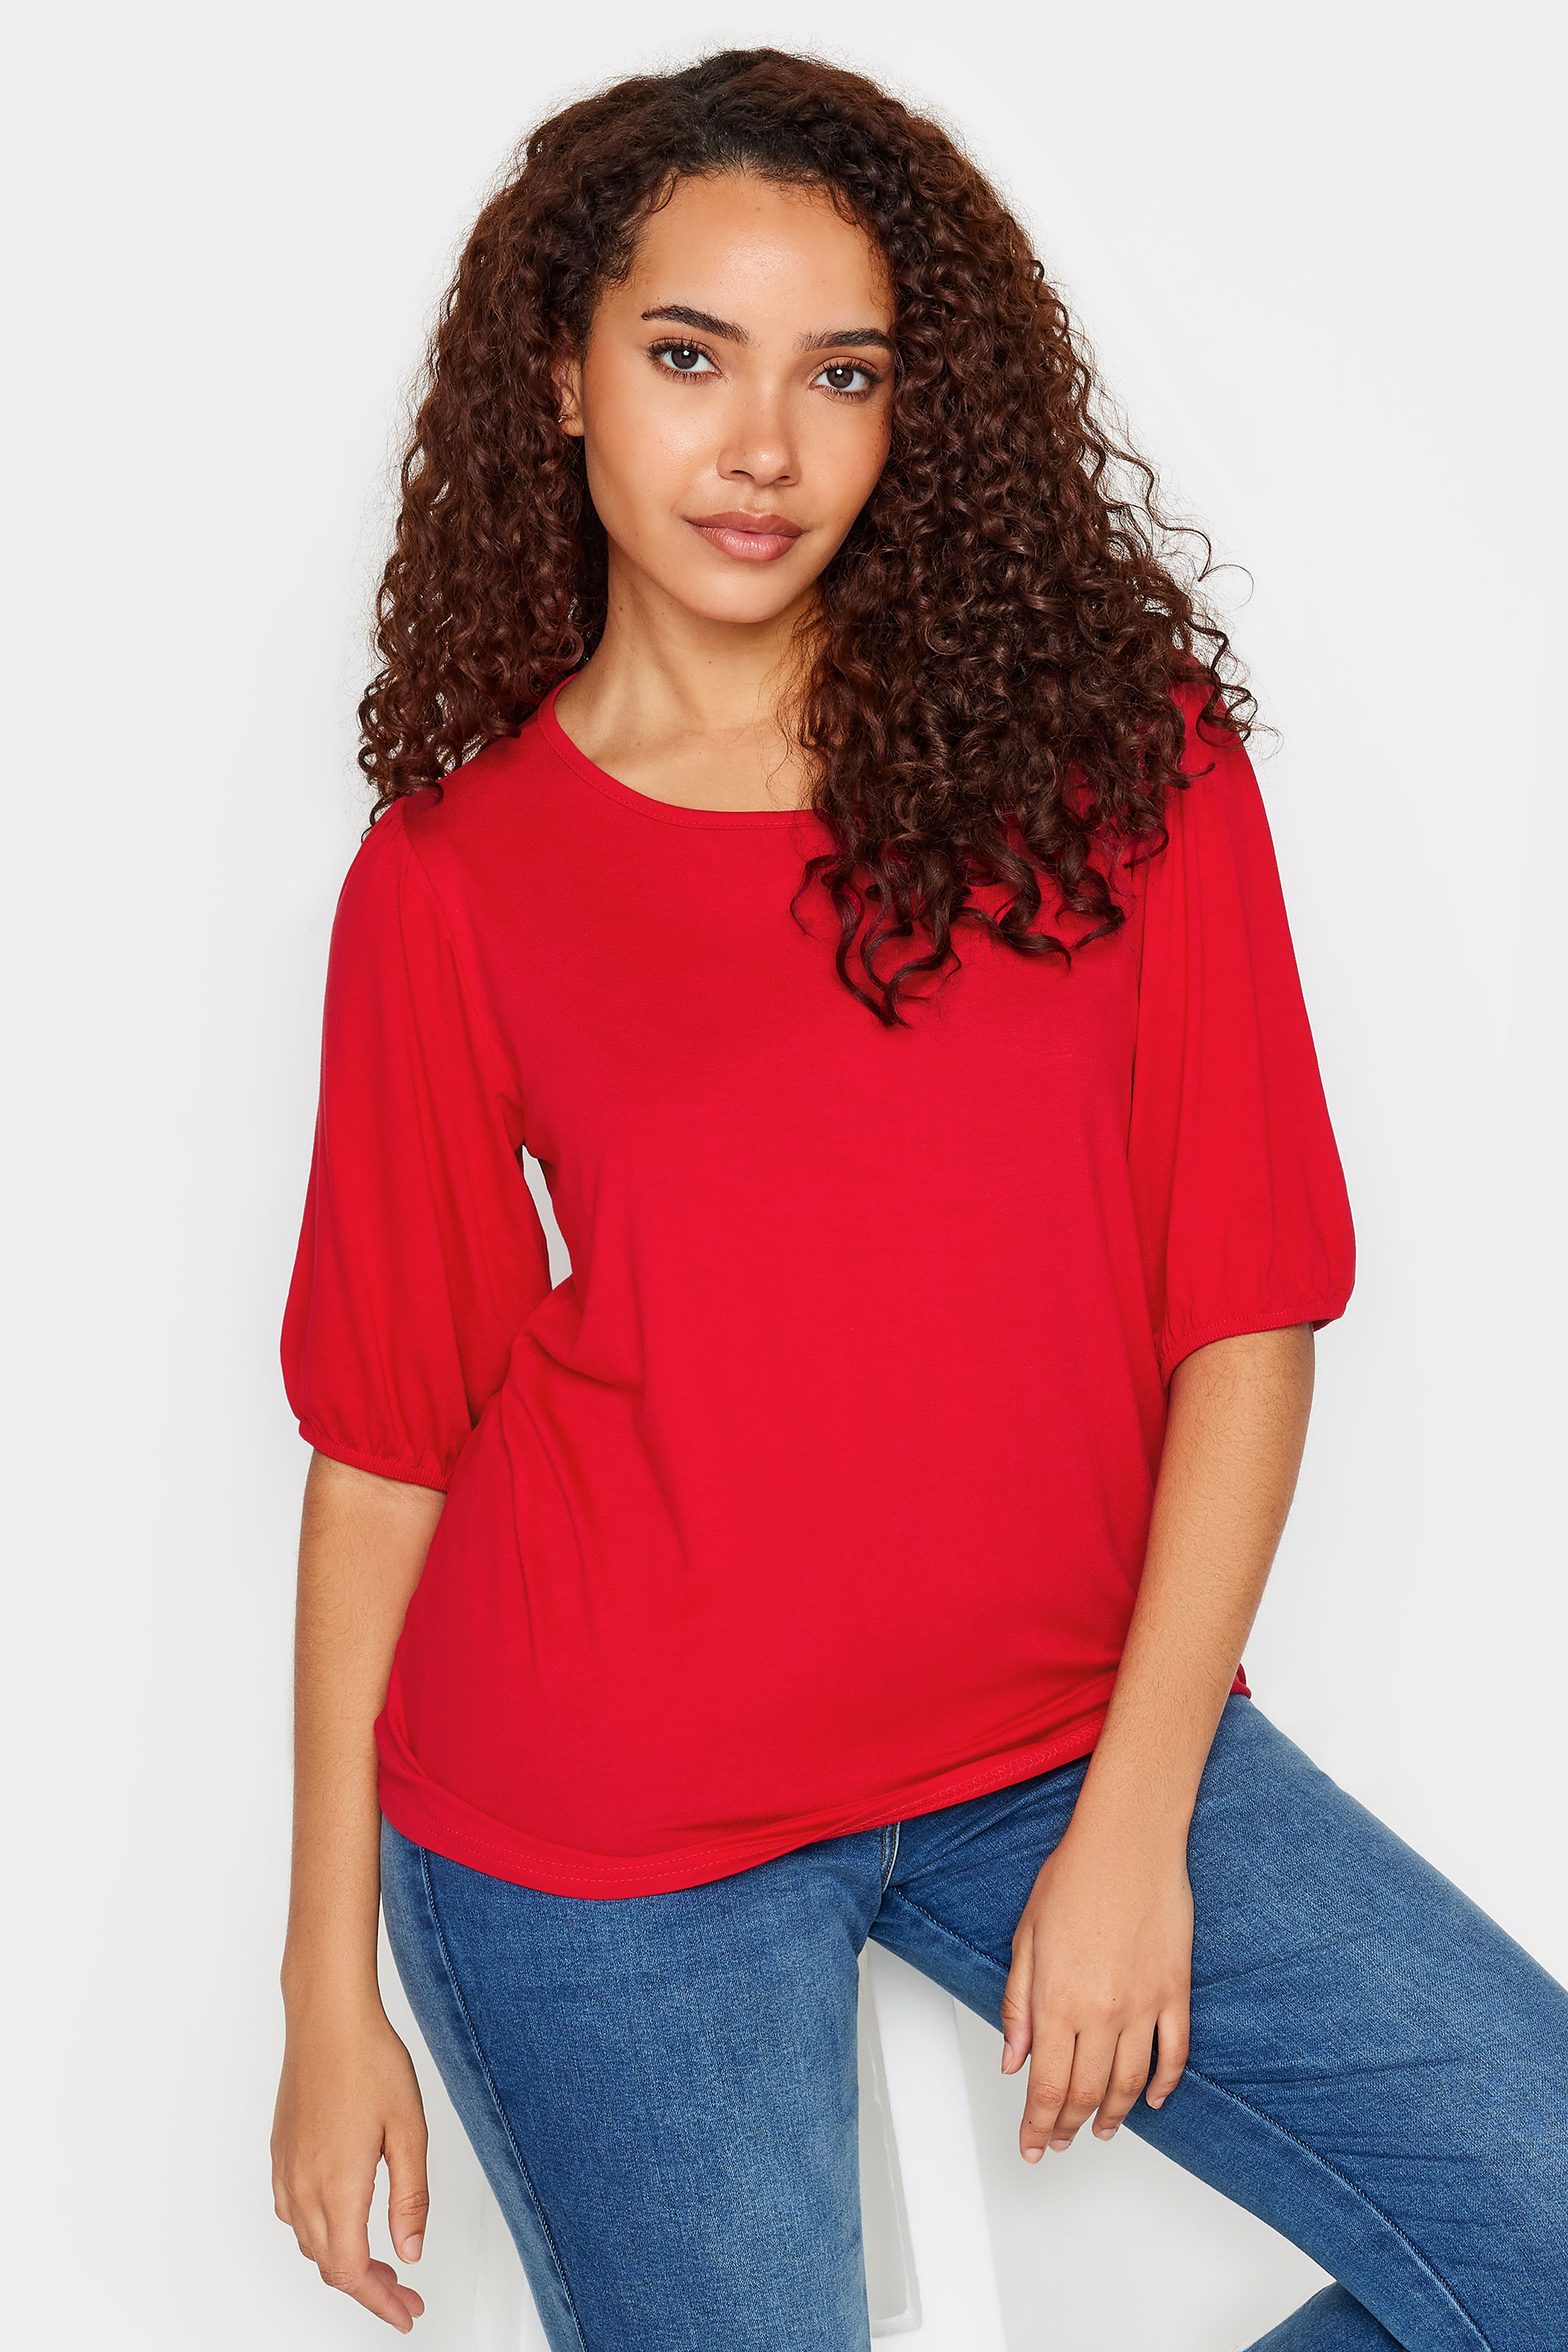 M&Co Red Balloon Sleeve Top | M&Co 1